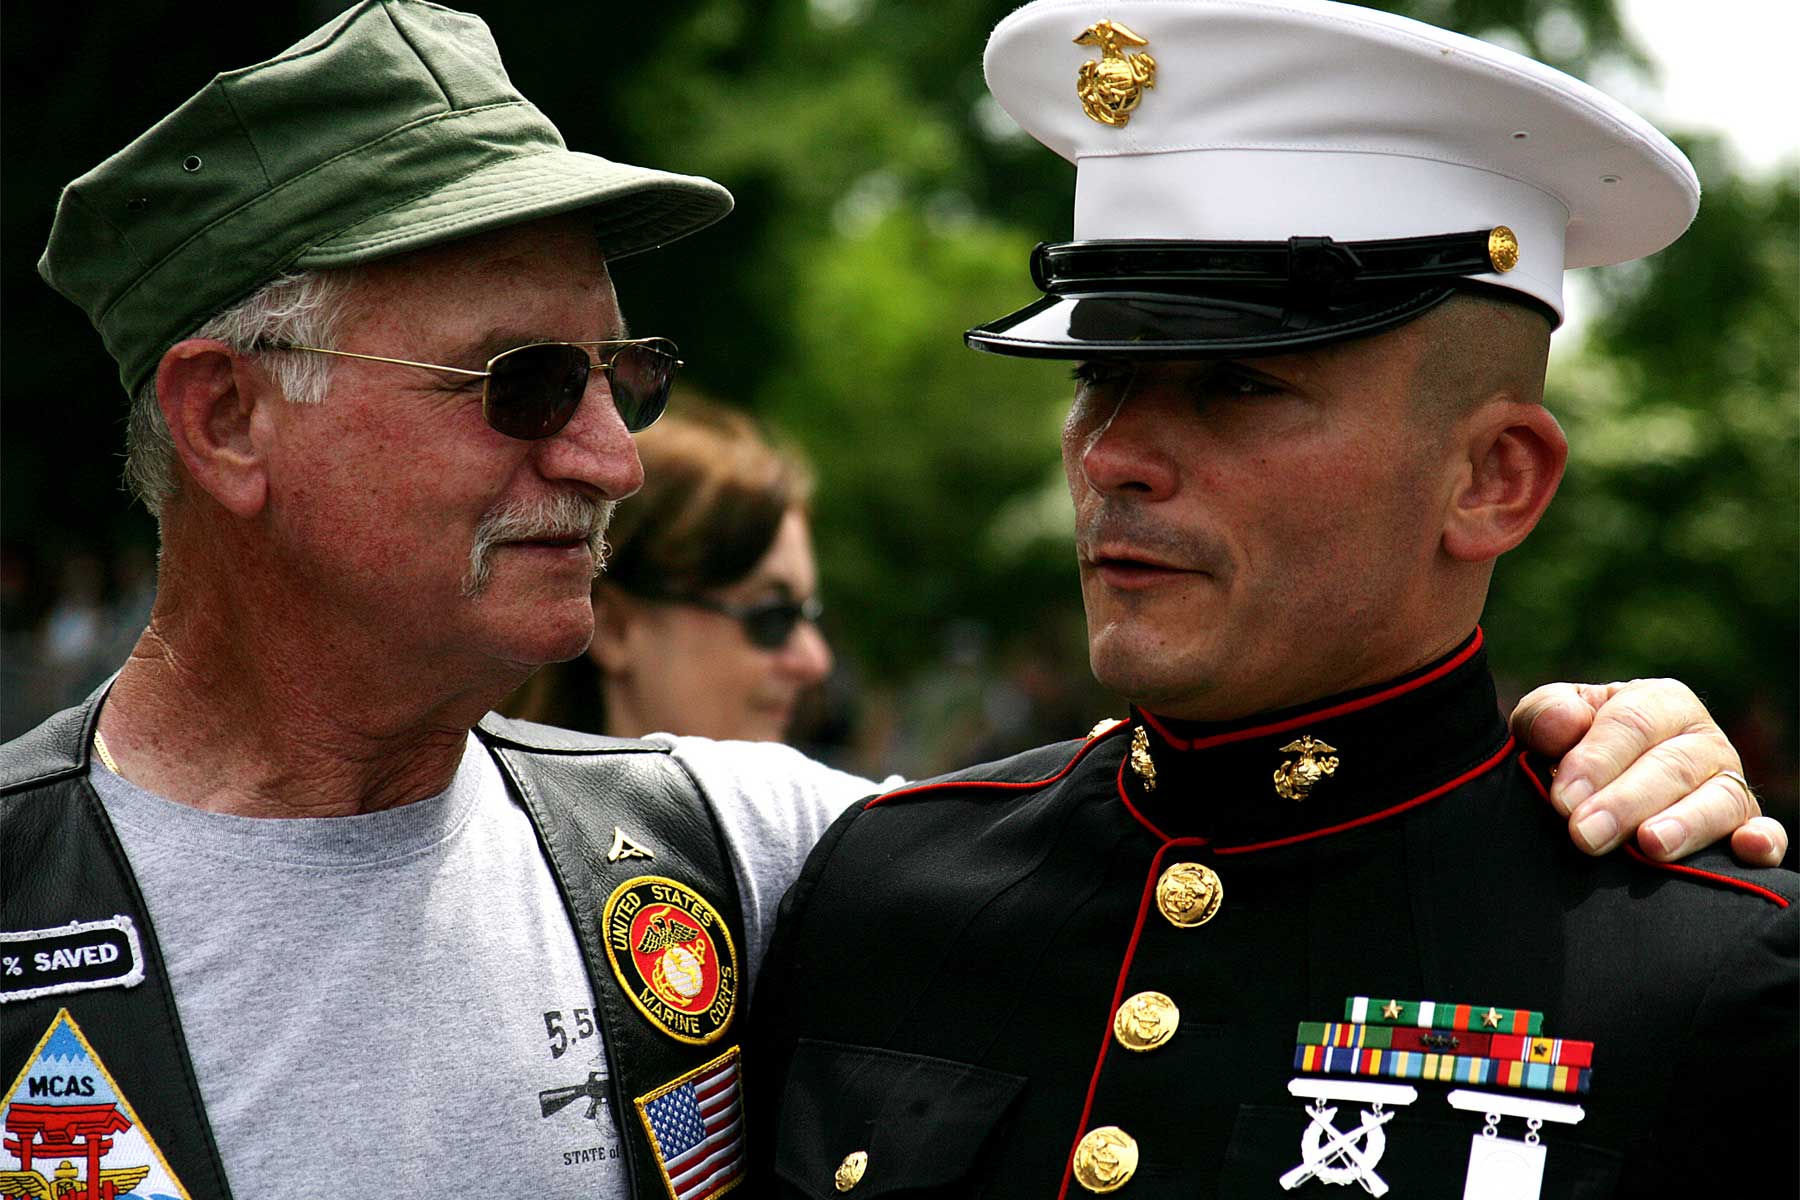 Every Veteran Has a Voice. Here's How We're Going to Listen to All of